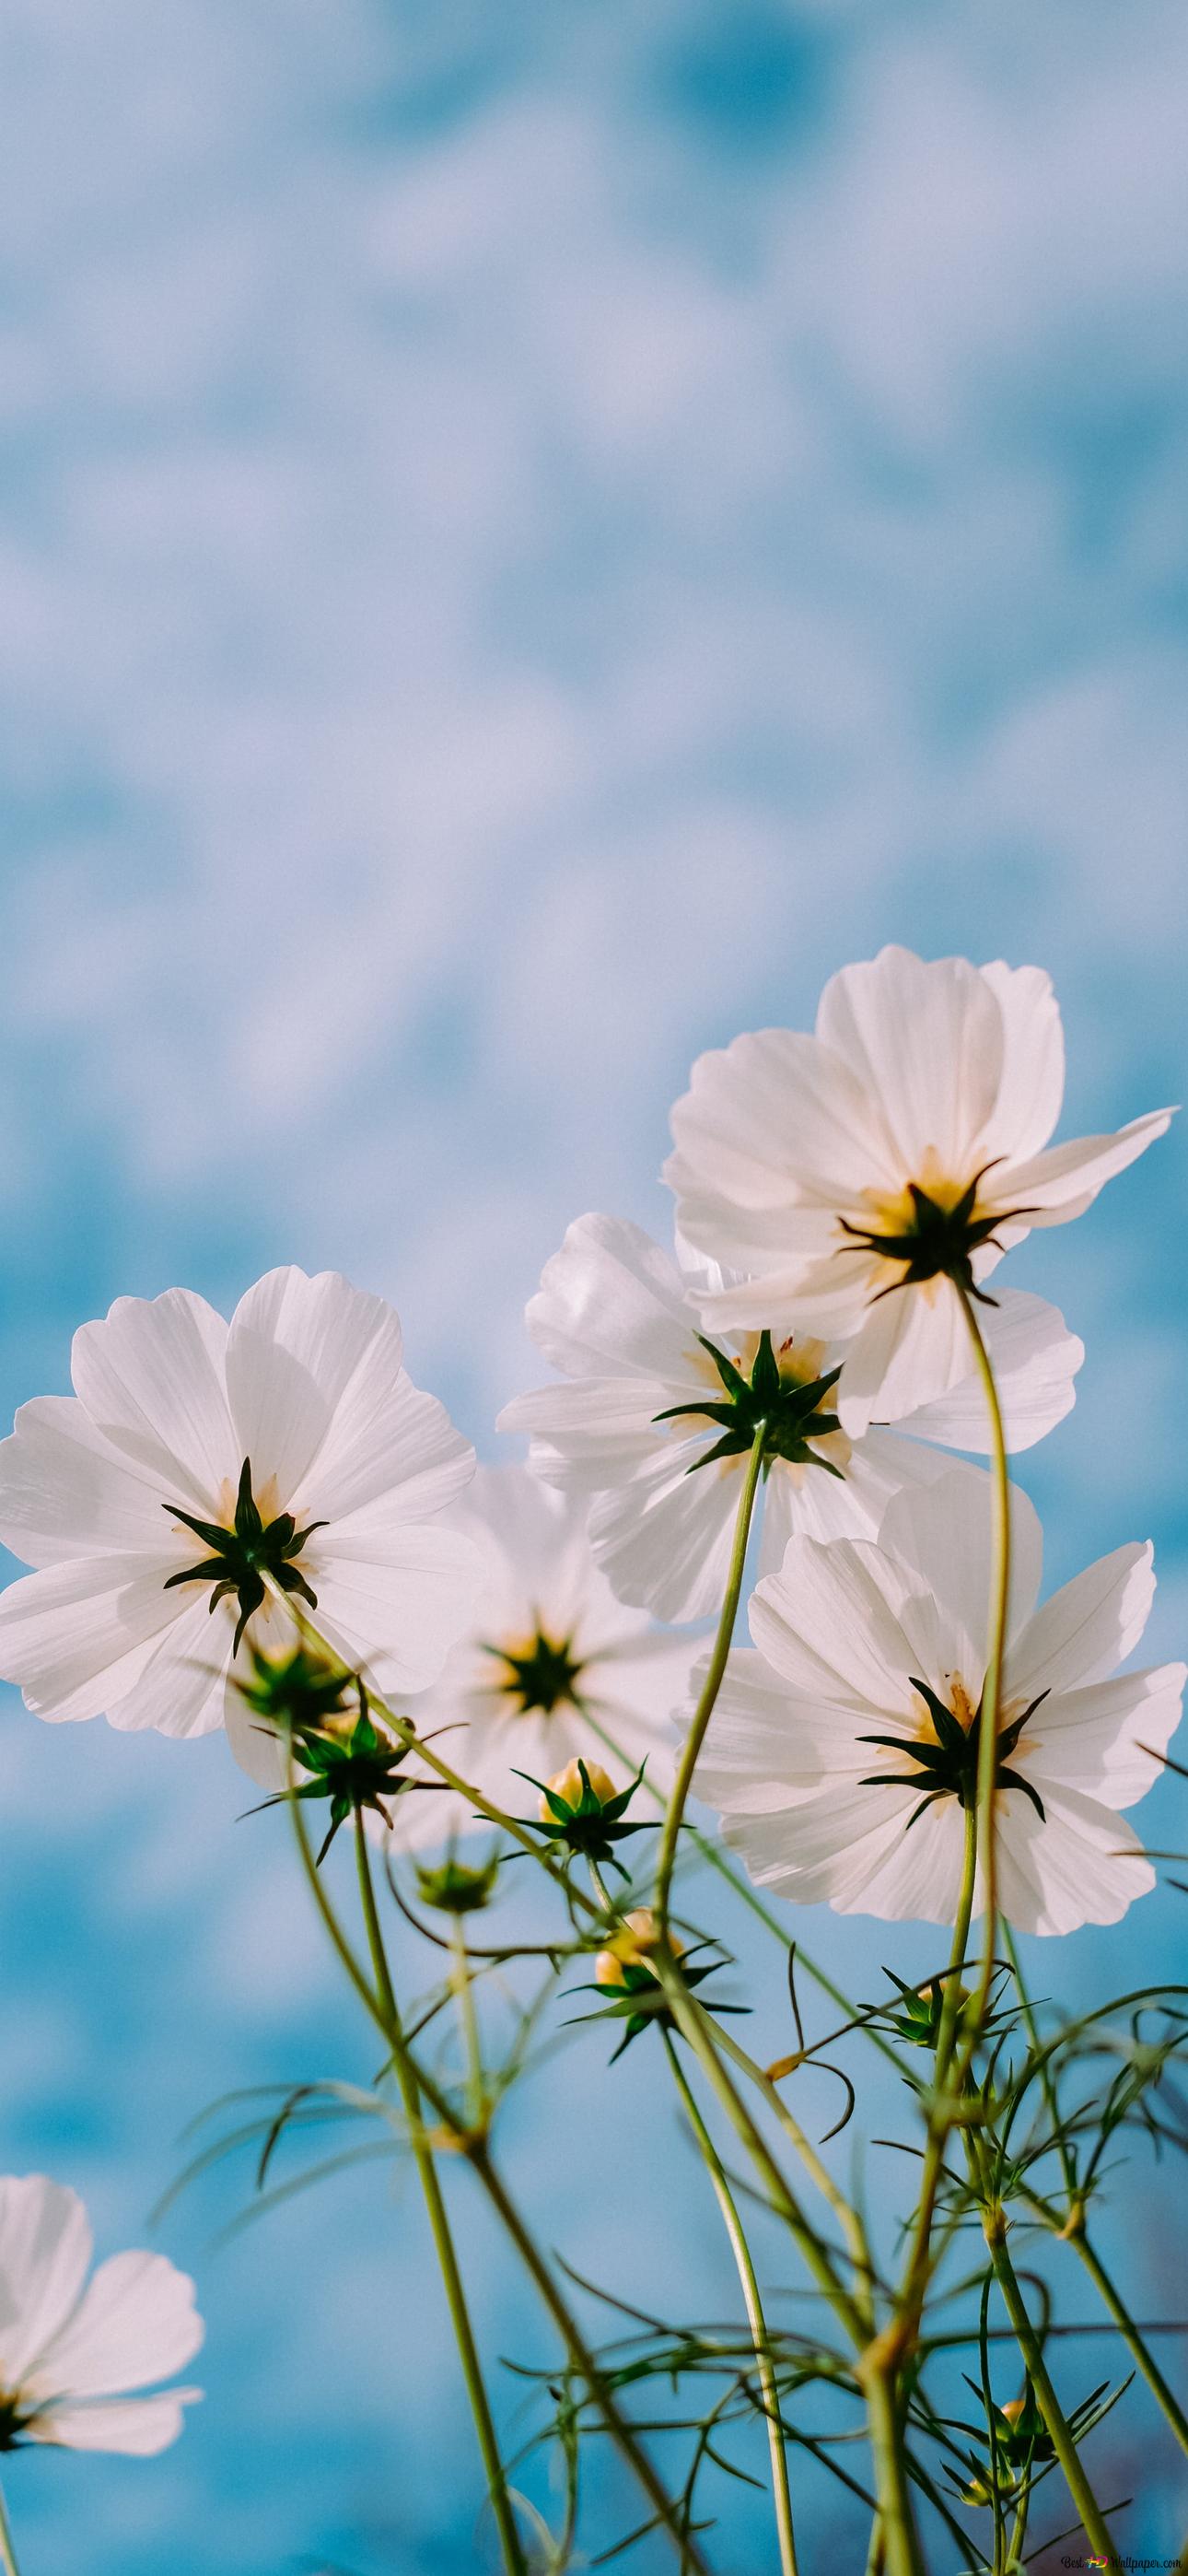 White flowers outdoors in spring 2K wallpaper download